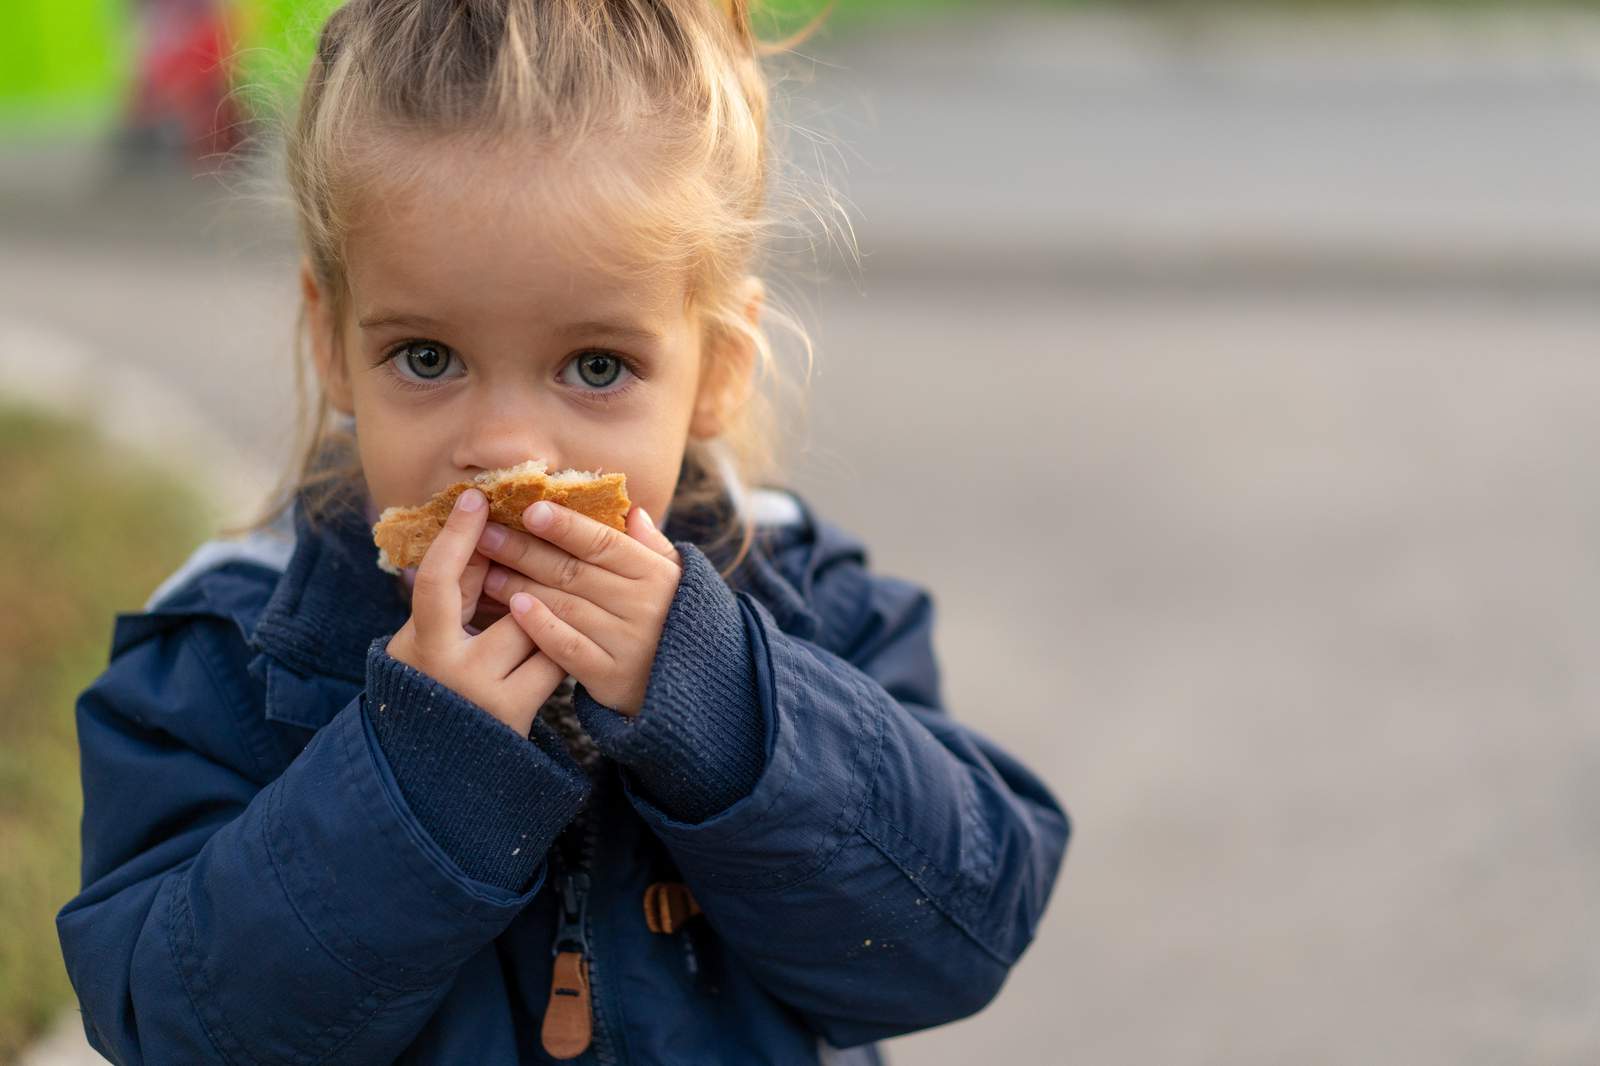 How to help ‘Kids’ Meals’ replace lost food due to power outages